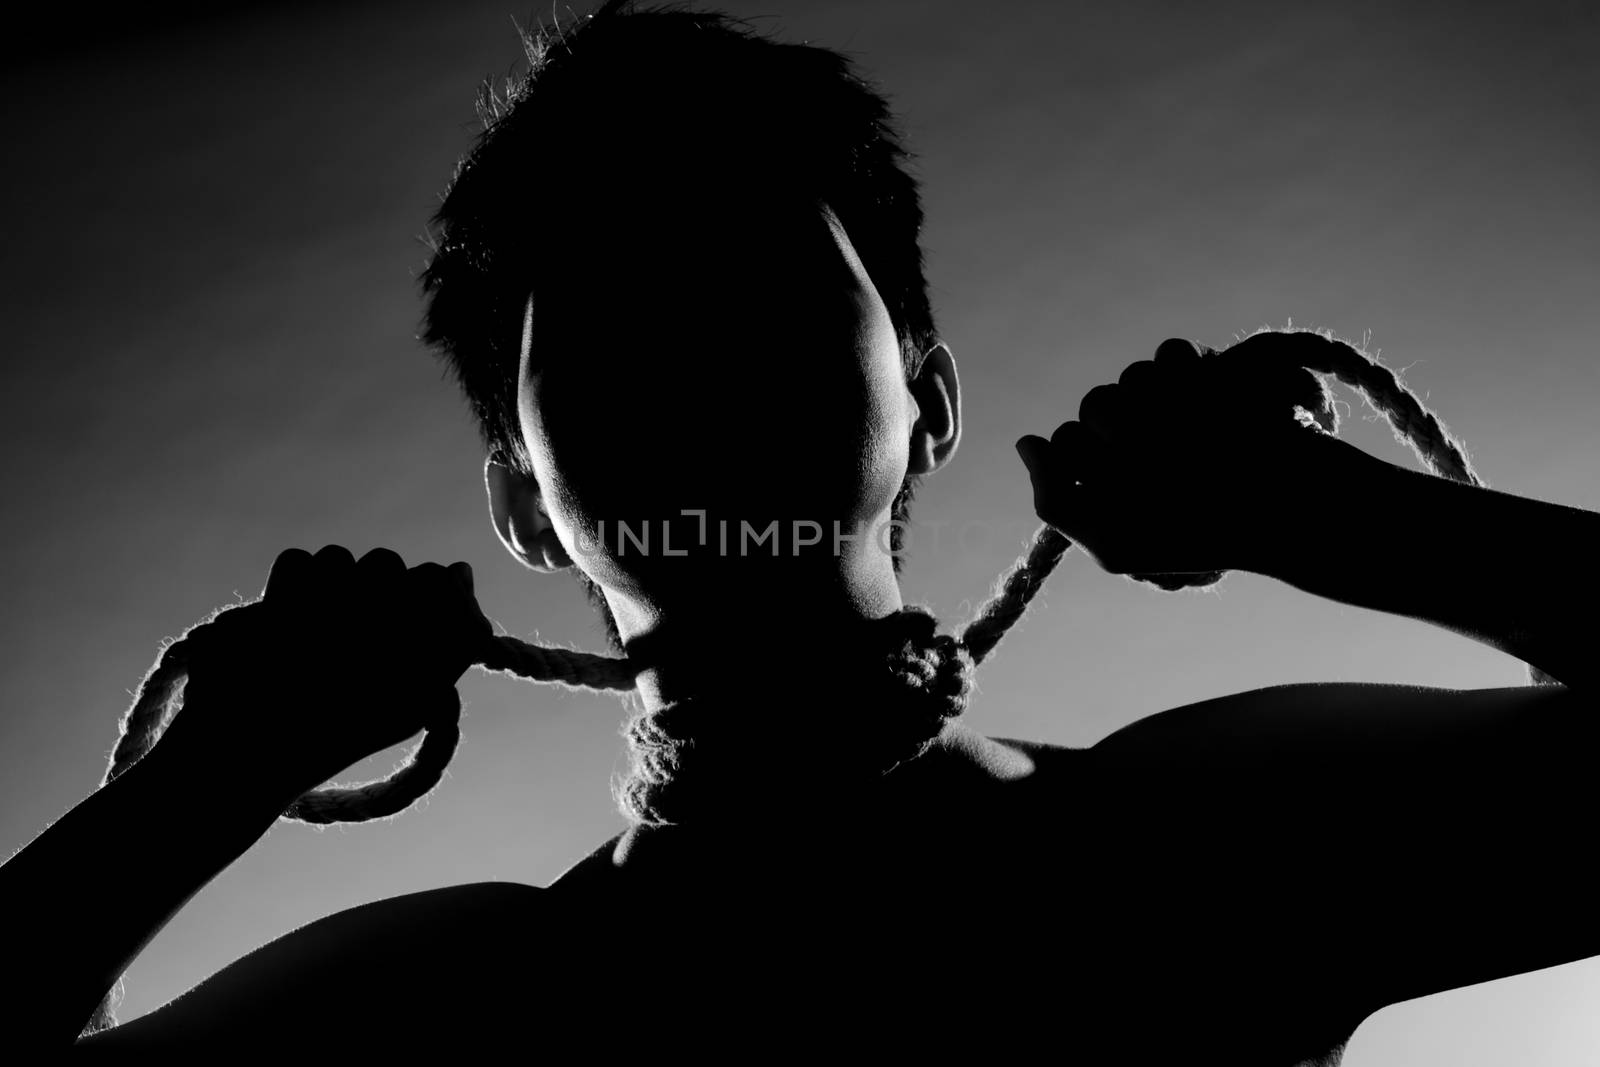 silhouette portrait of a girl with short hair, having rope around her neck